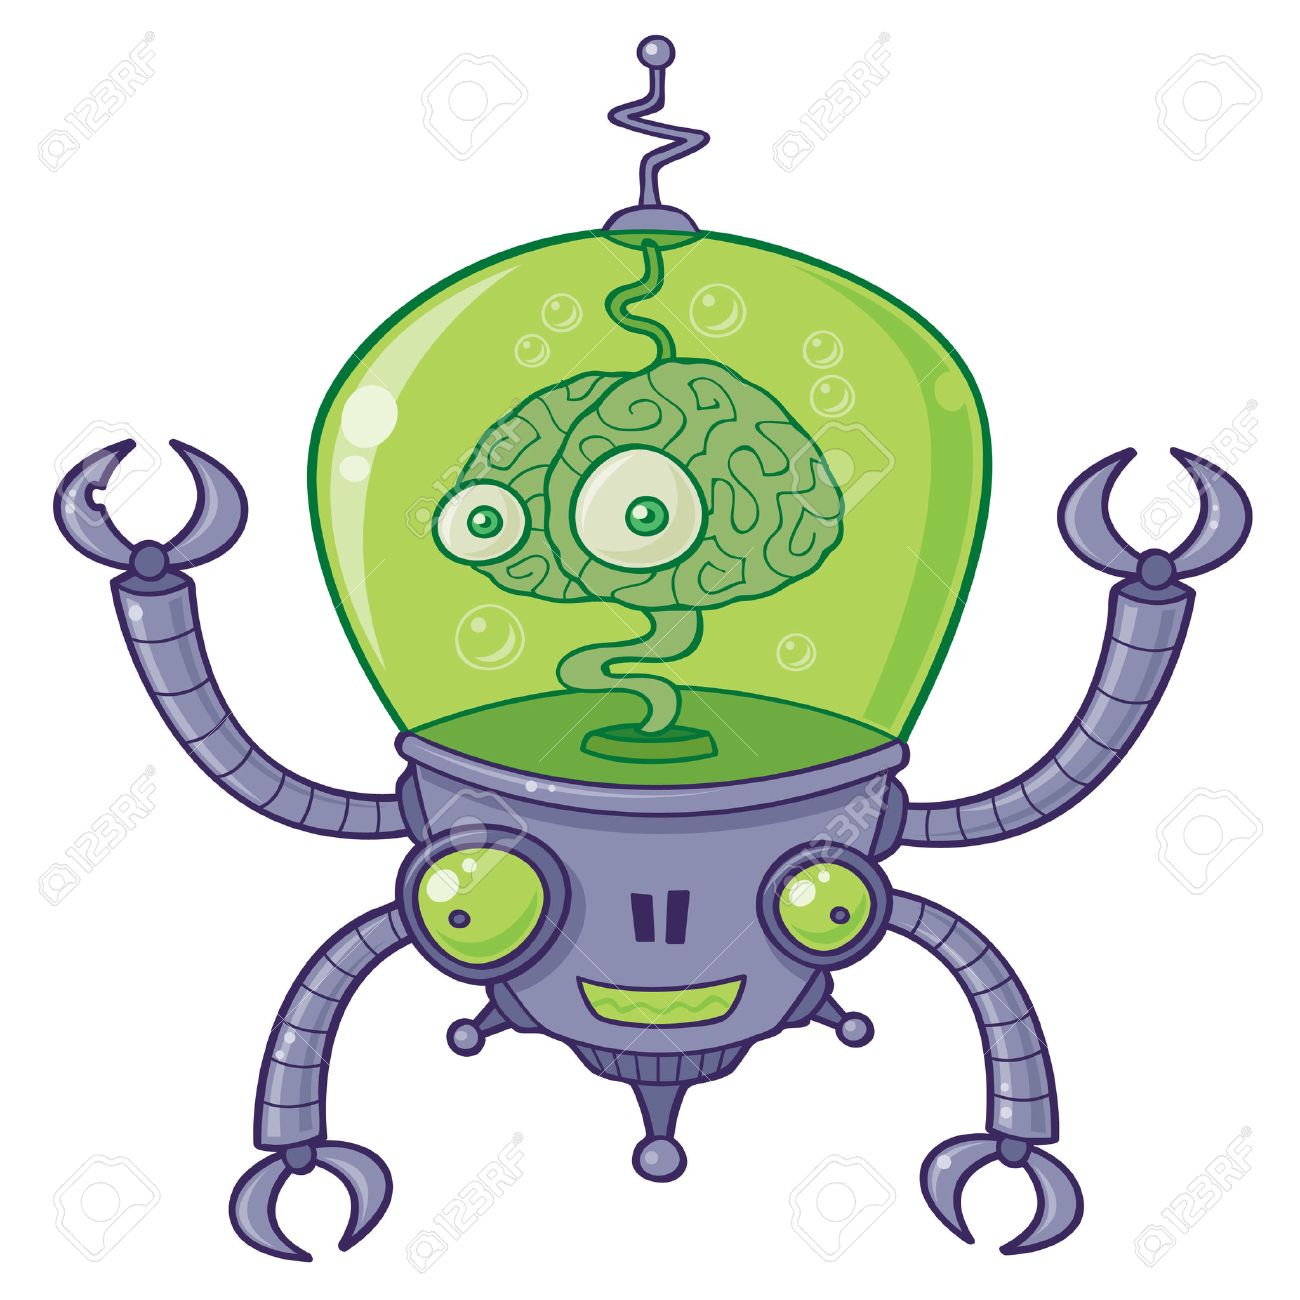 5110860-Vector-cartoon-illustration-of-a-robot-with-a-large-brain-with-eyes-in-green-liquid-BrainBot-has-fou-Stock-Vector.jpg